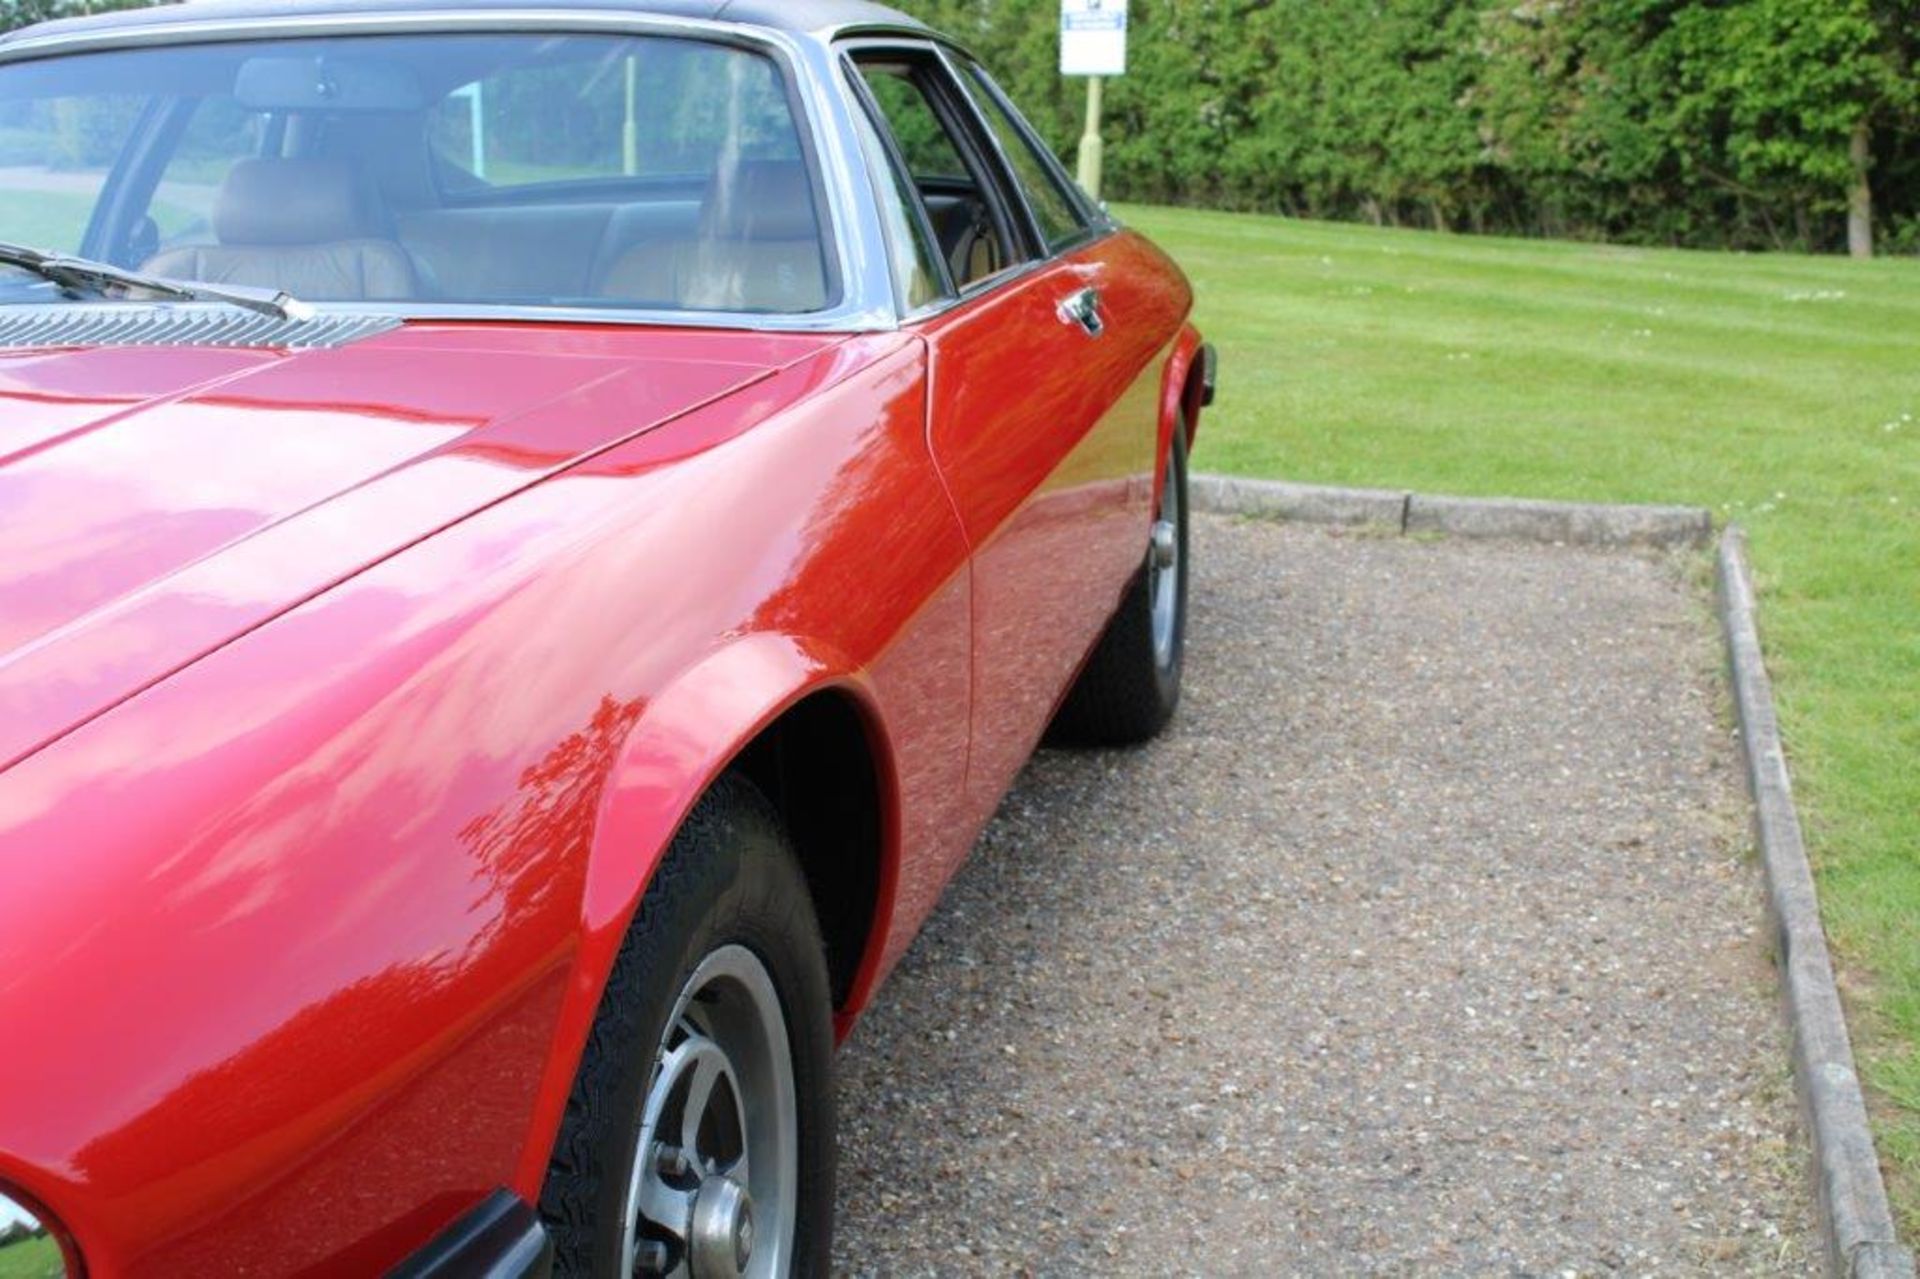 1976 Jaguar XJ-S 5.3 V12 Coupe Auto 29,030 miles from new - Image 11 of 28